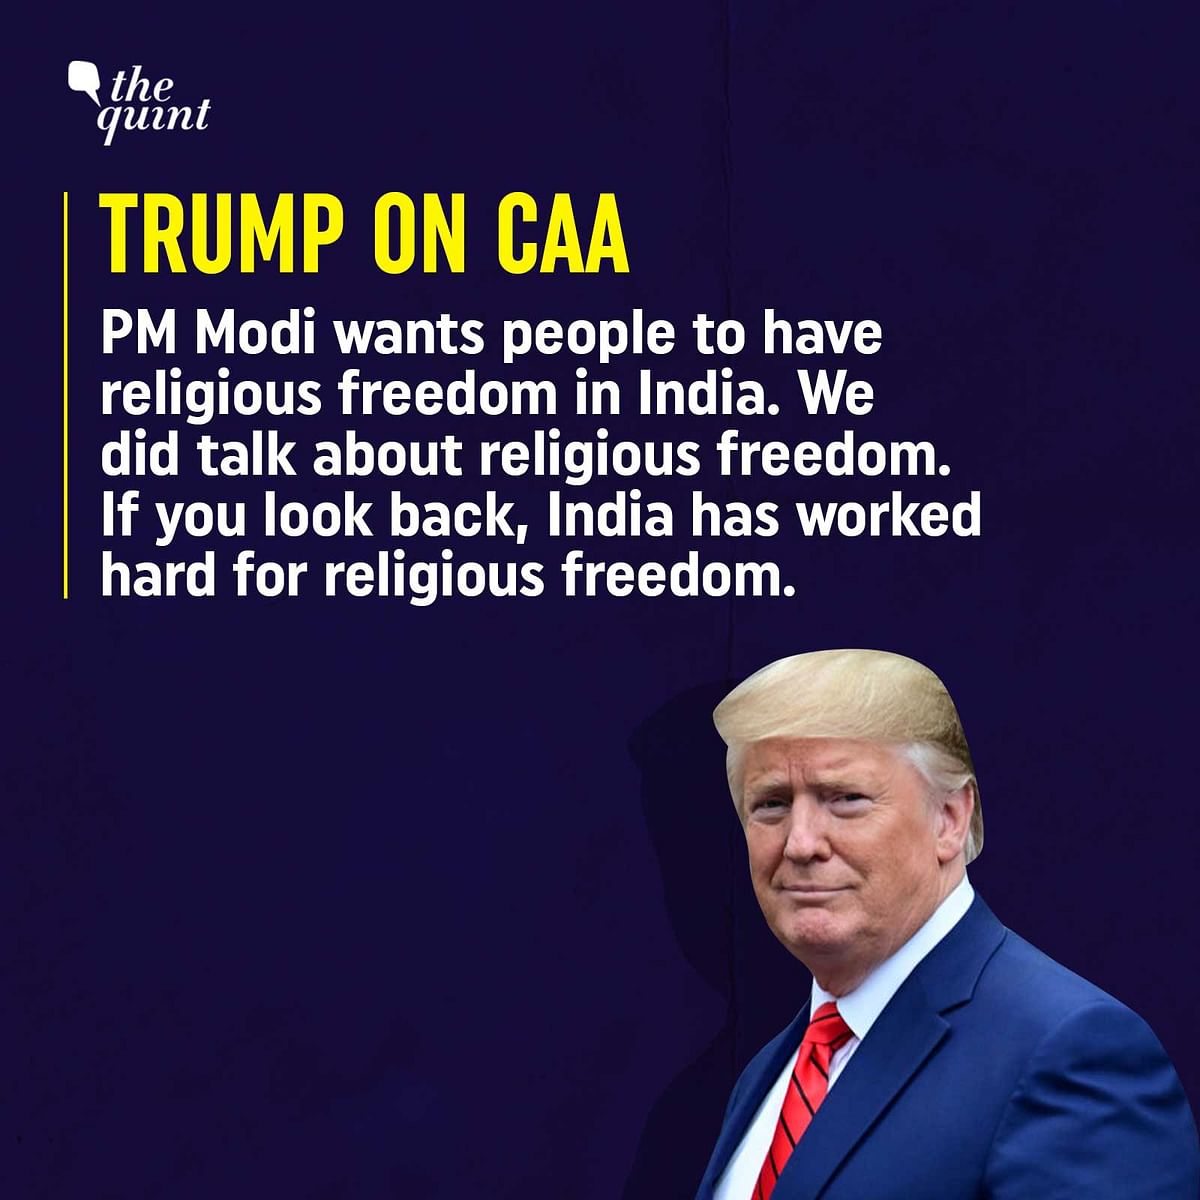 US President Donald Trump took questions from the media following a press briefing in New Delhi.